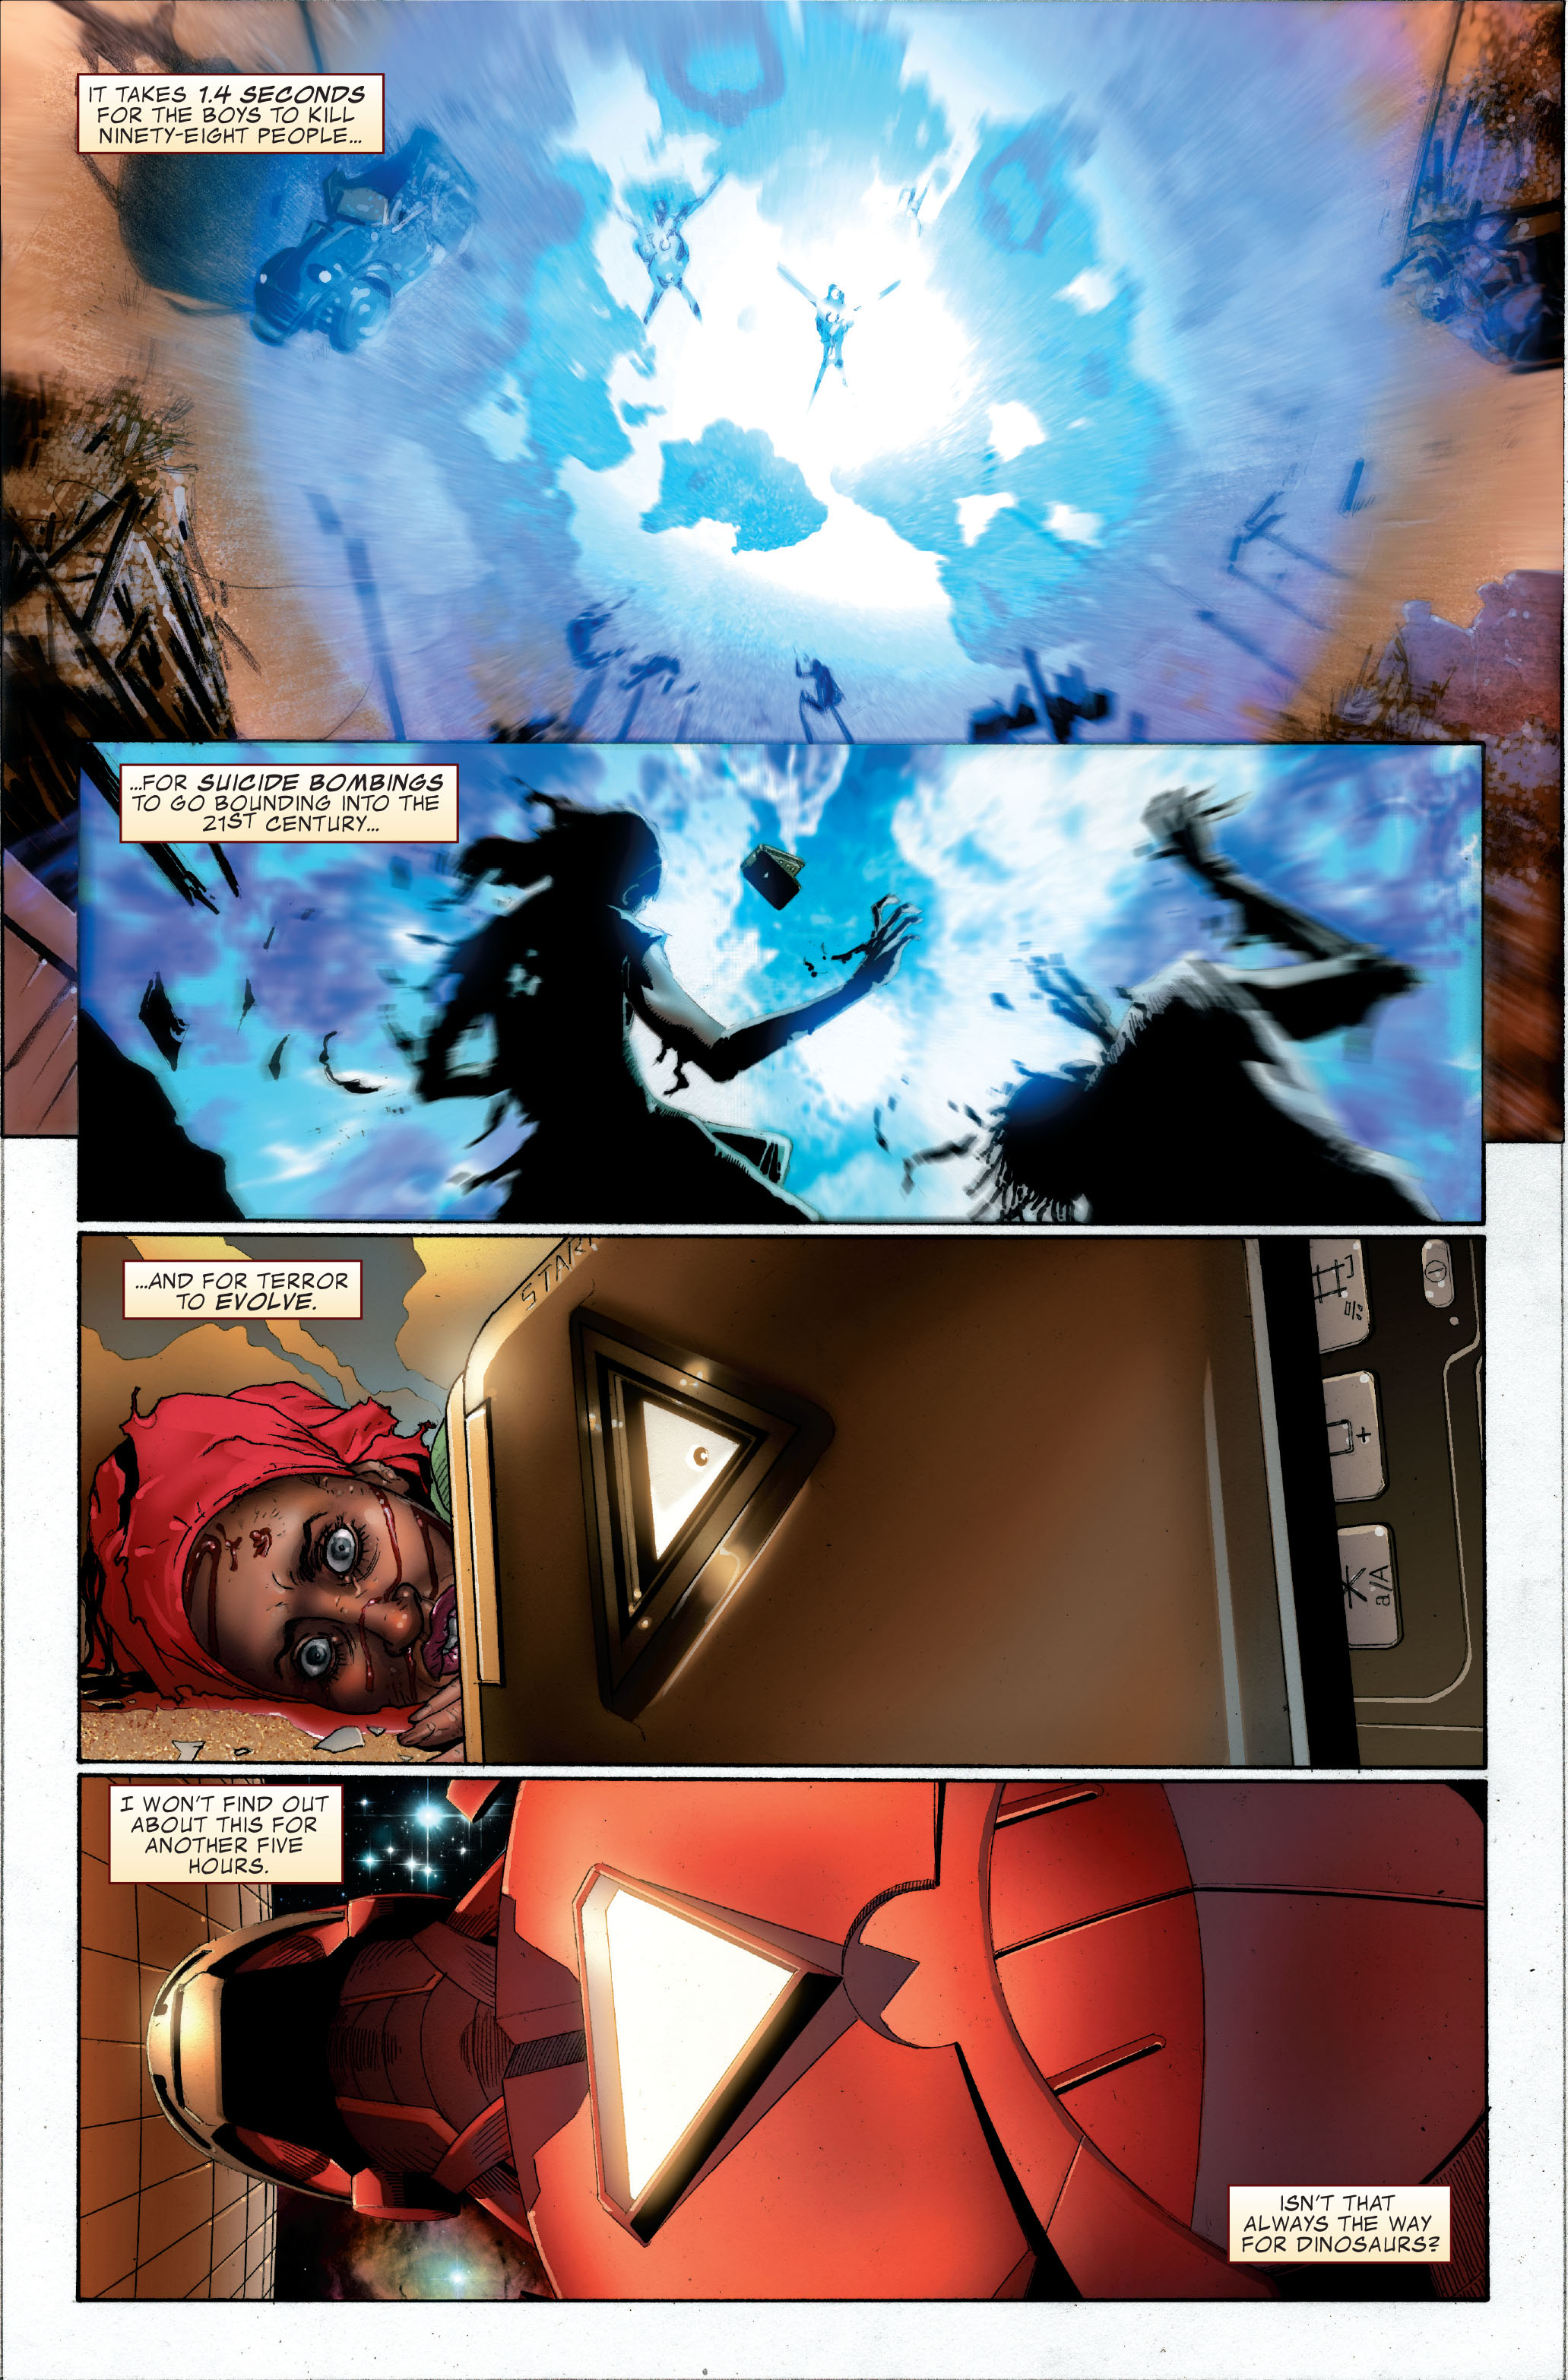 Invincible Iron Man (2008) 1 Page 3